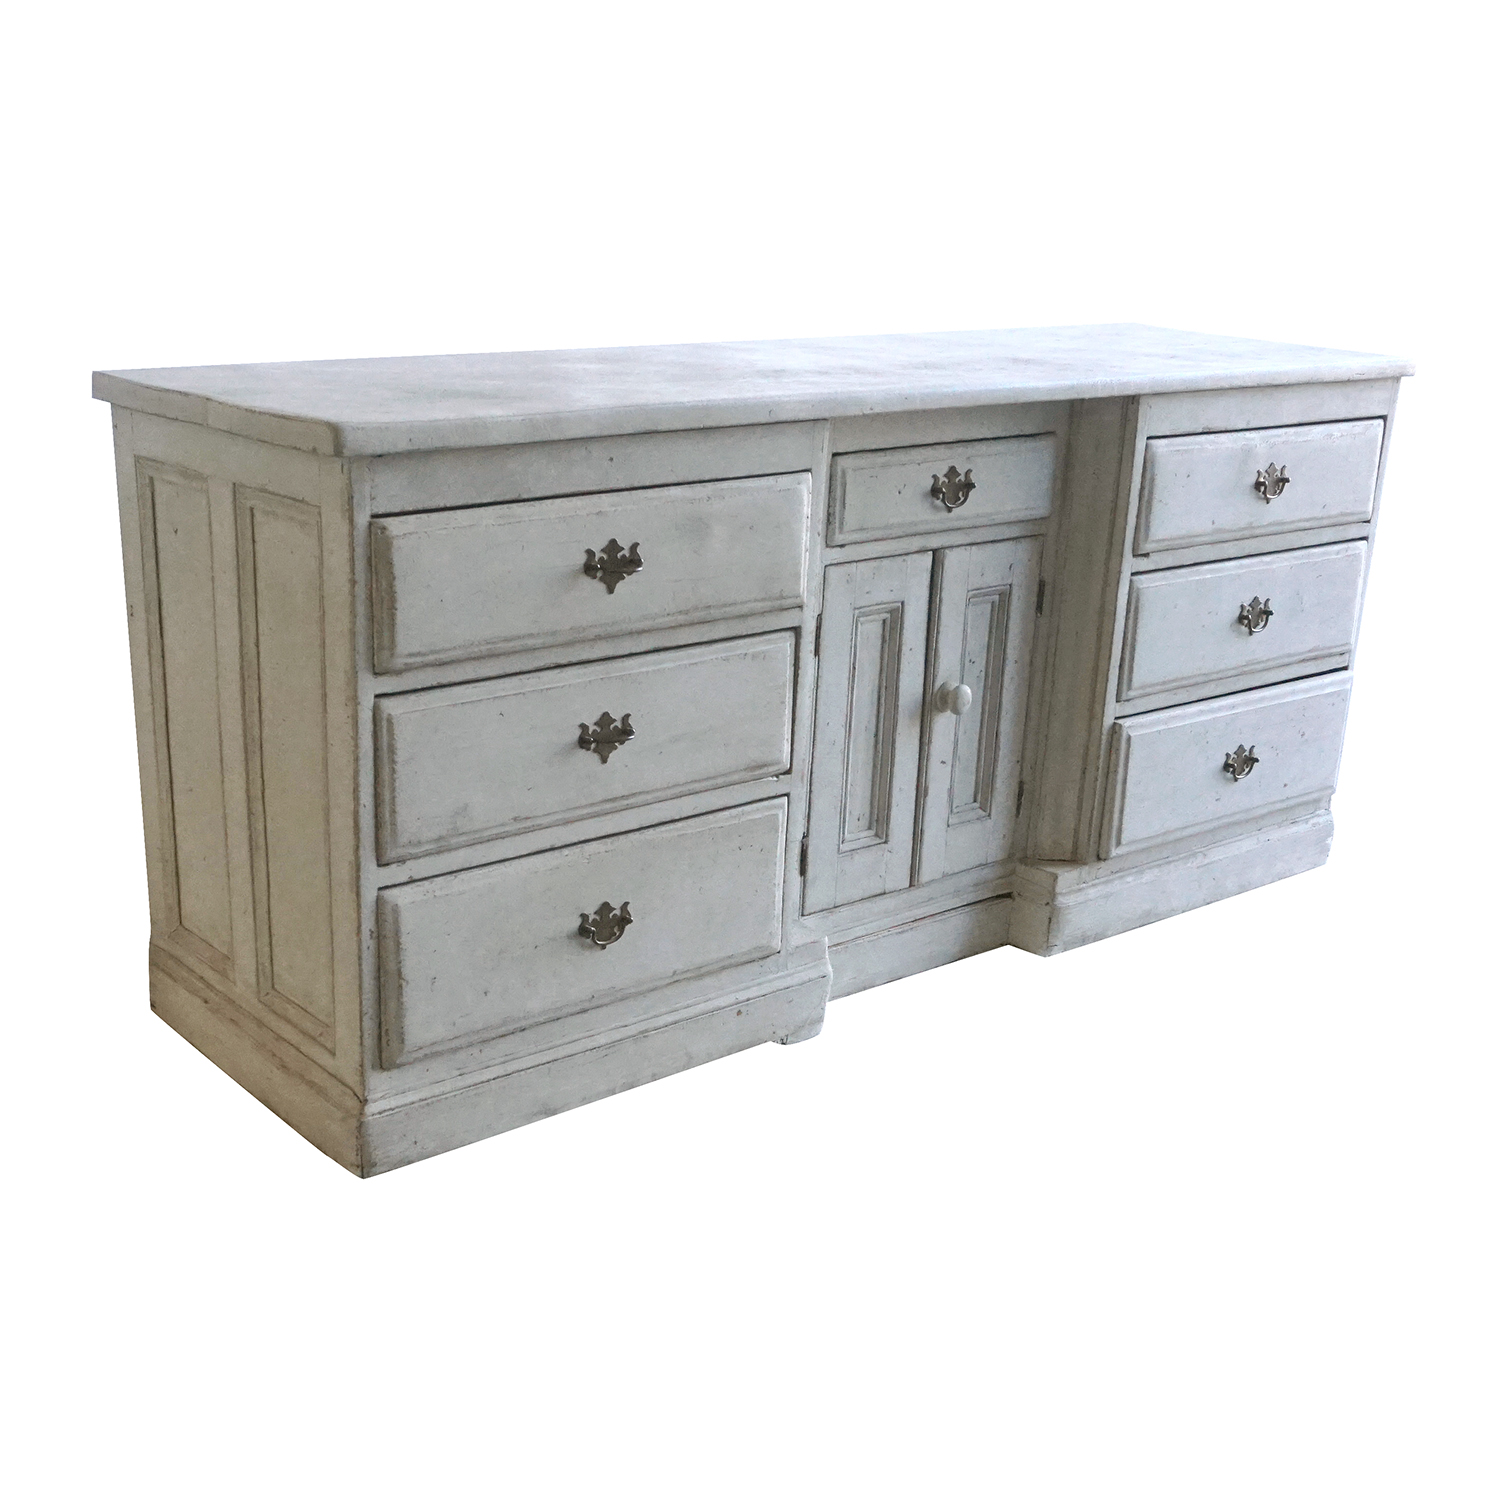 19th Century Swedish Gustavian Chest of Drawers – Antique Pinewood Sideboard